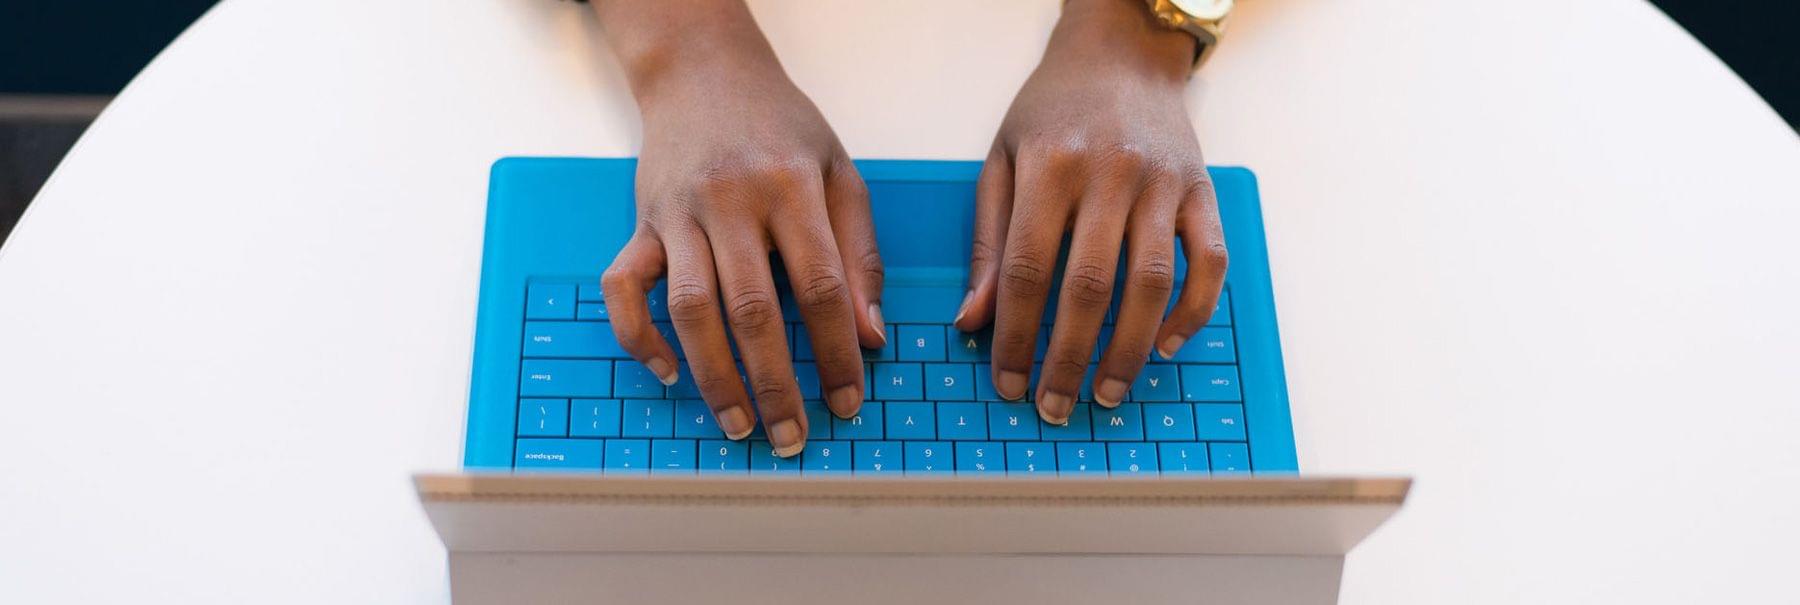 Hands typing on a laptop keyboard.